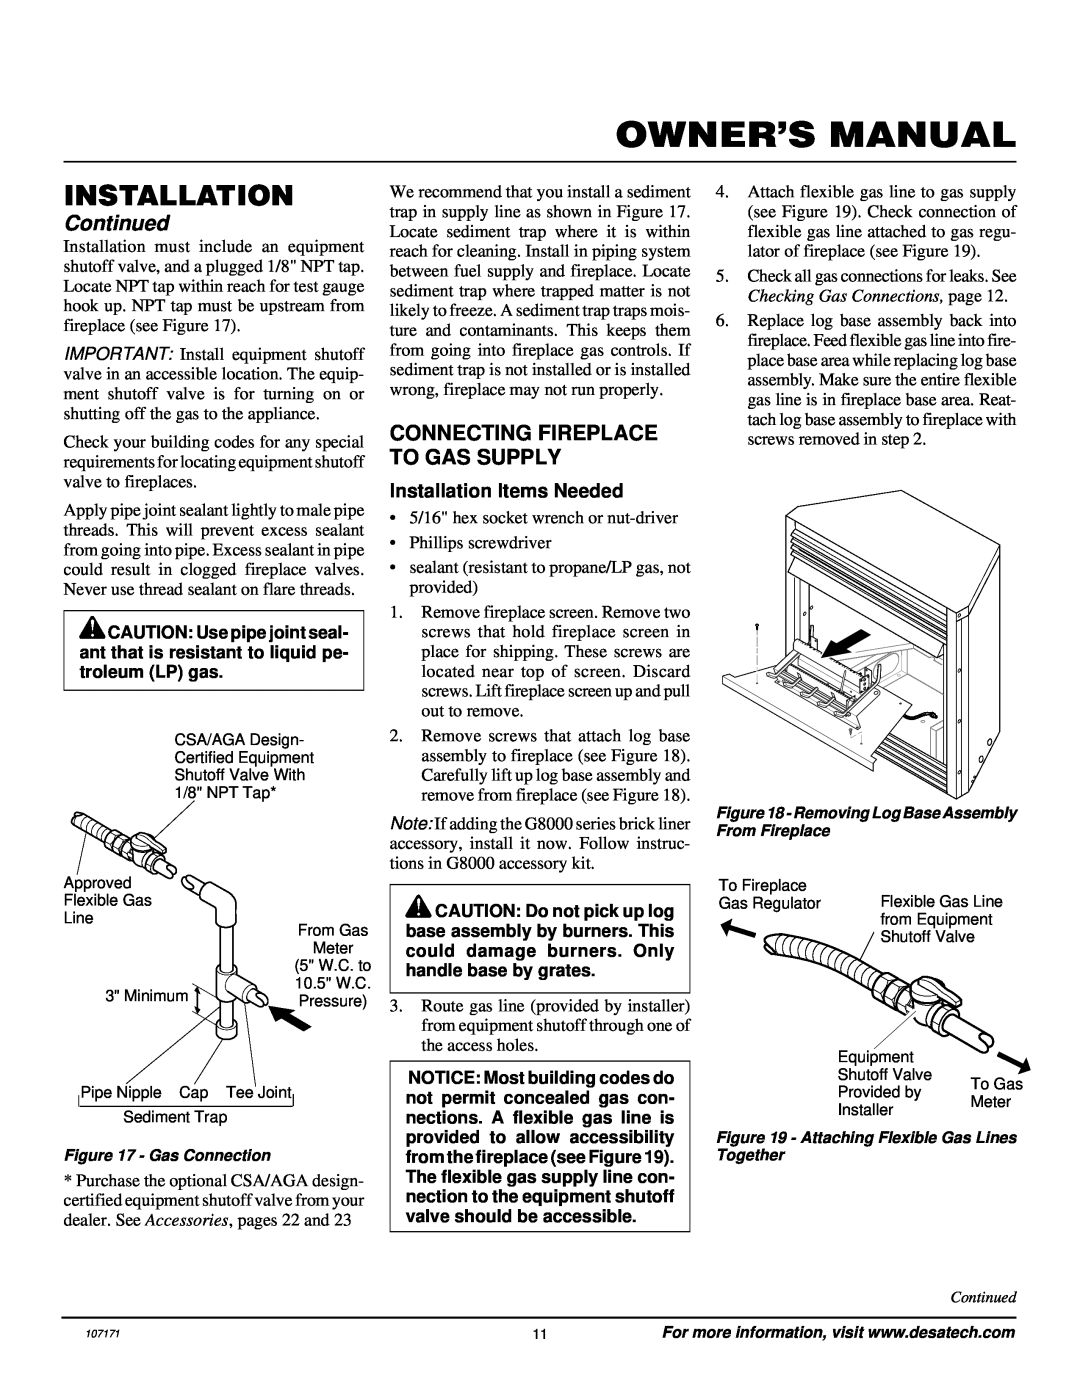 Desa VSGF33NR installation manual Connecting Fireplace To Gas Supply, Continued, Installation Items Needed 